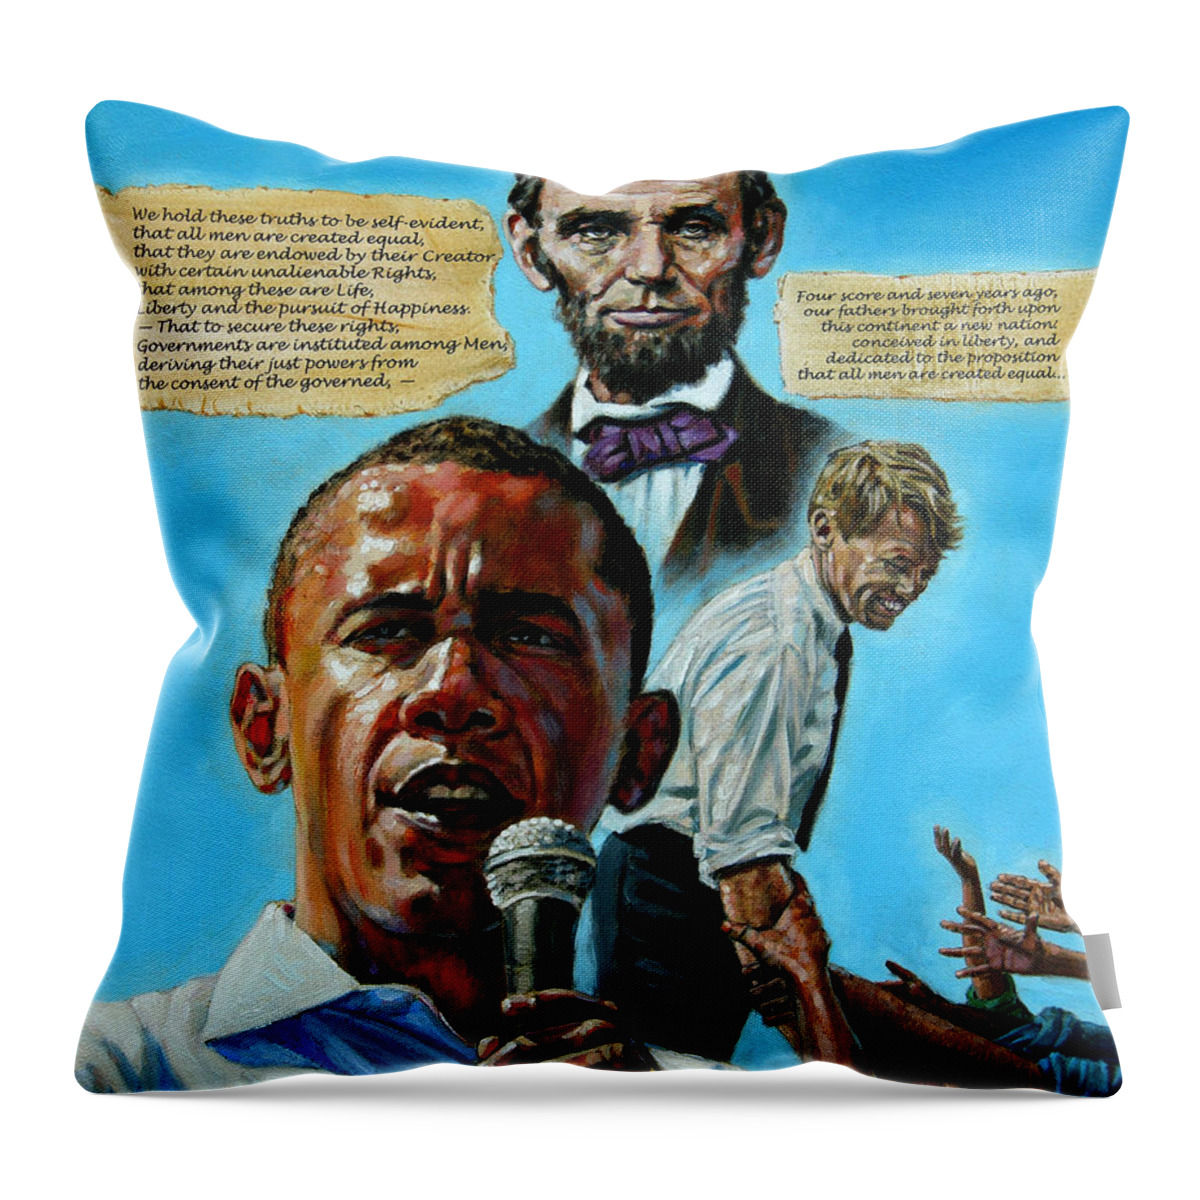 Obama Throw Pillow featuring the painting Obamas Heritage by John Lautermilch